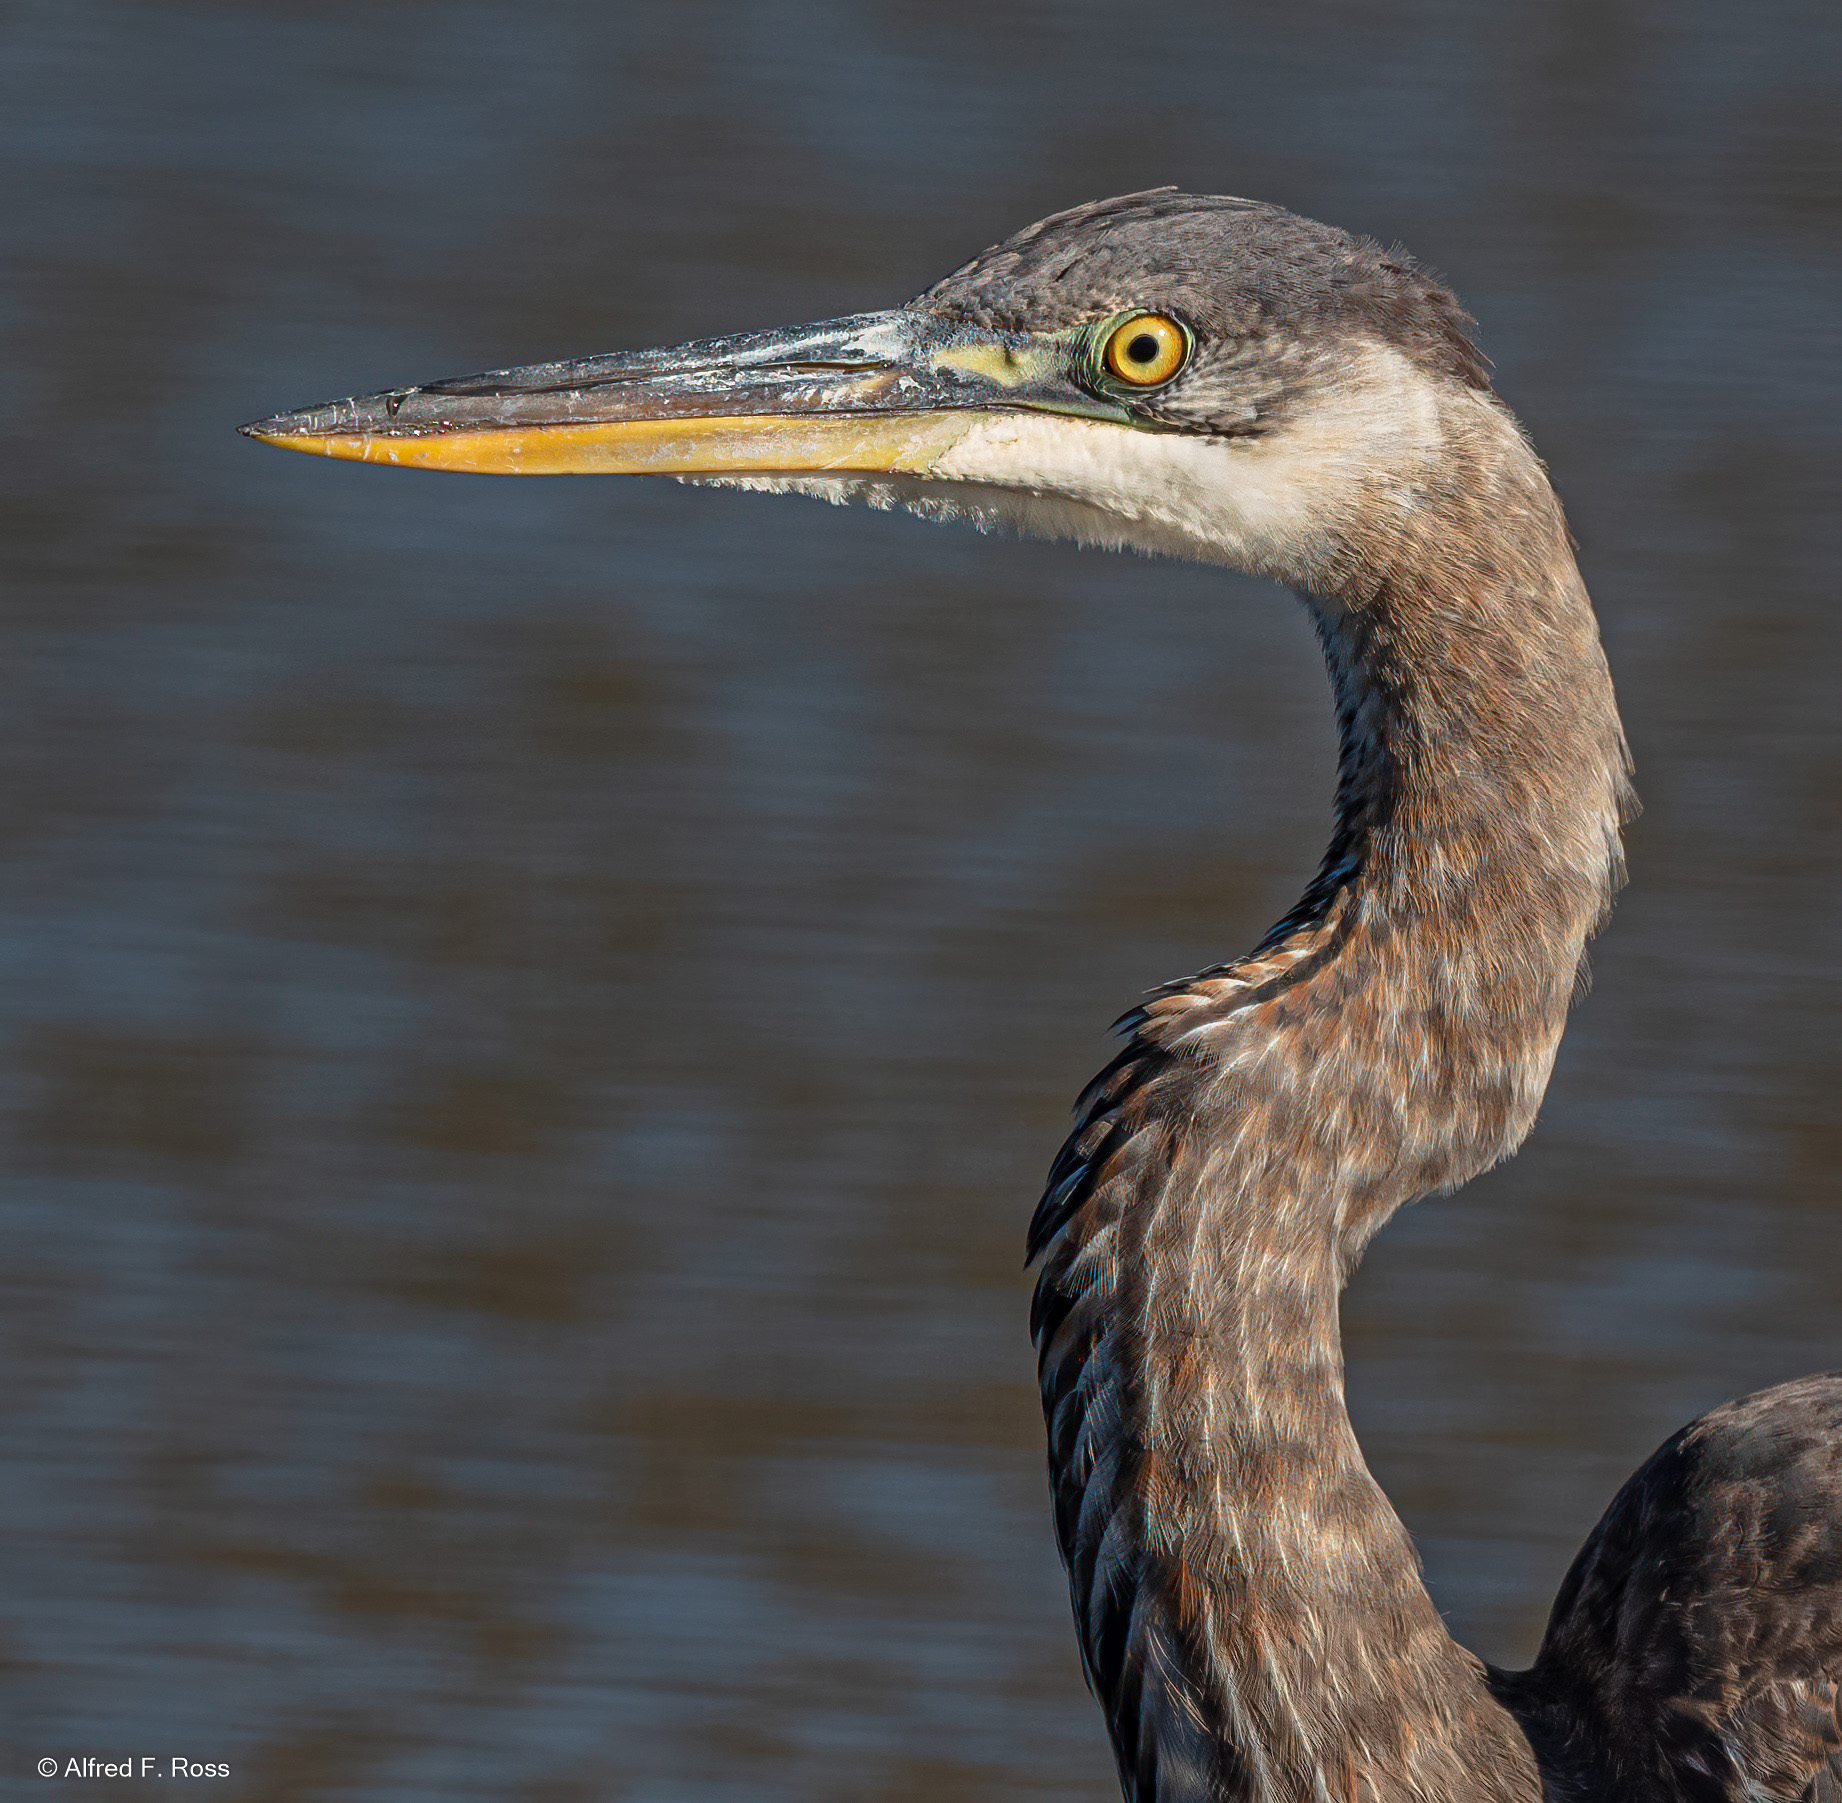 Great Blue Heron, photo by Alfred F. Ross